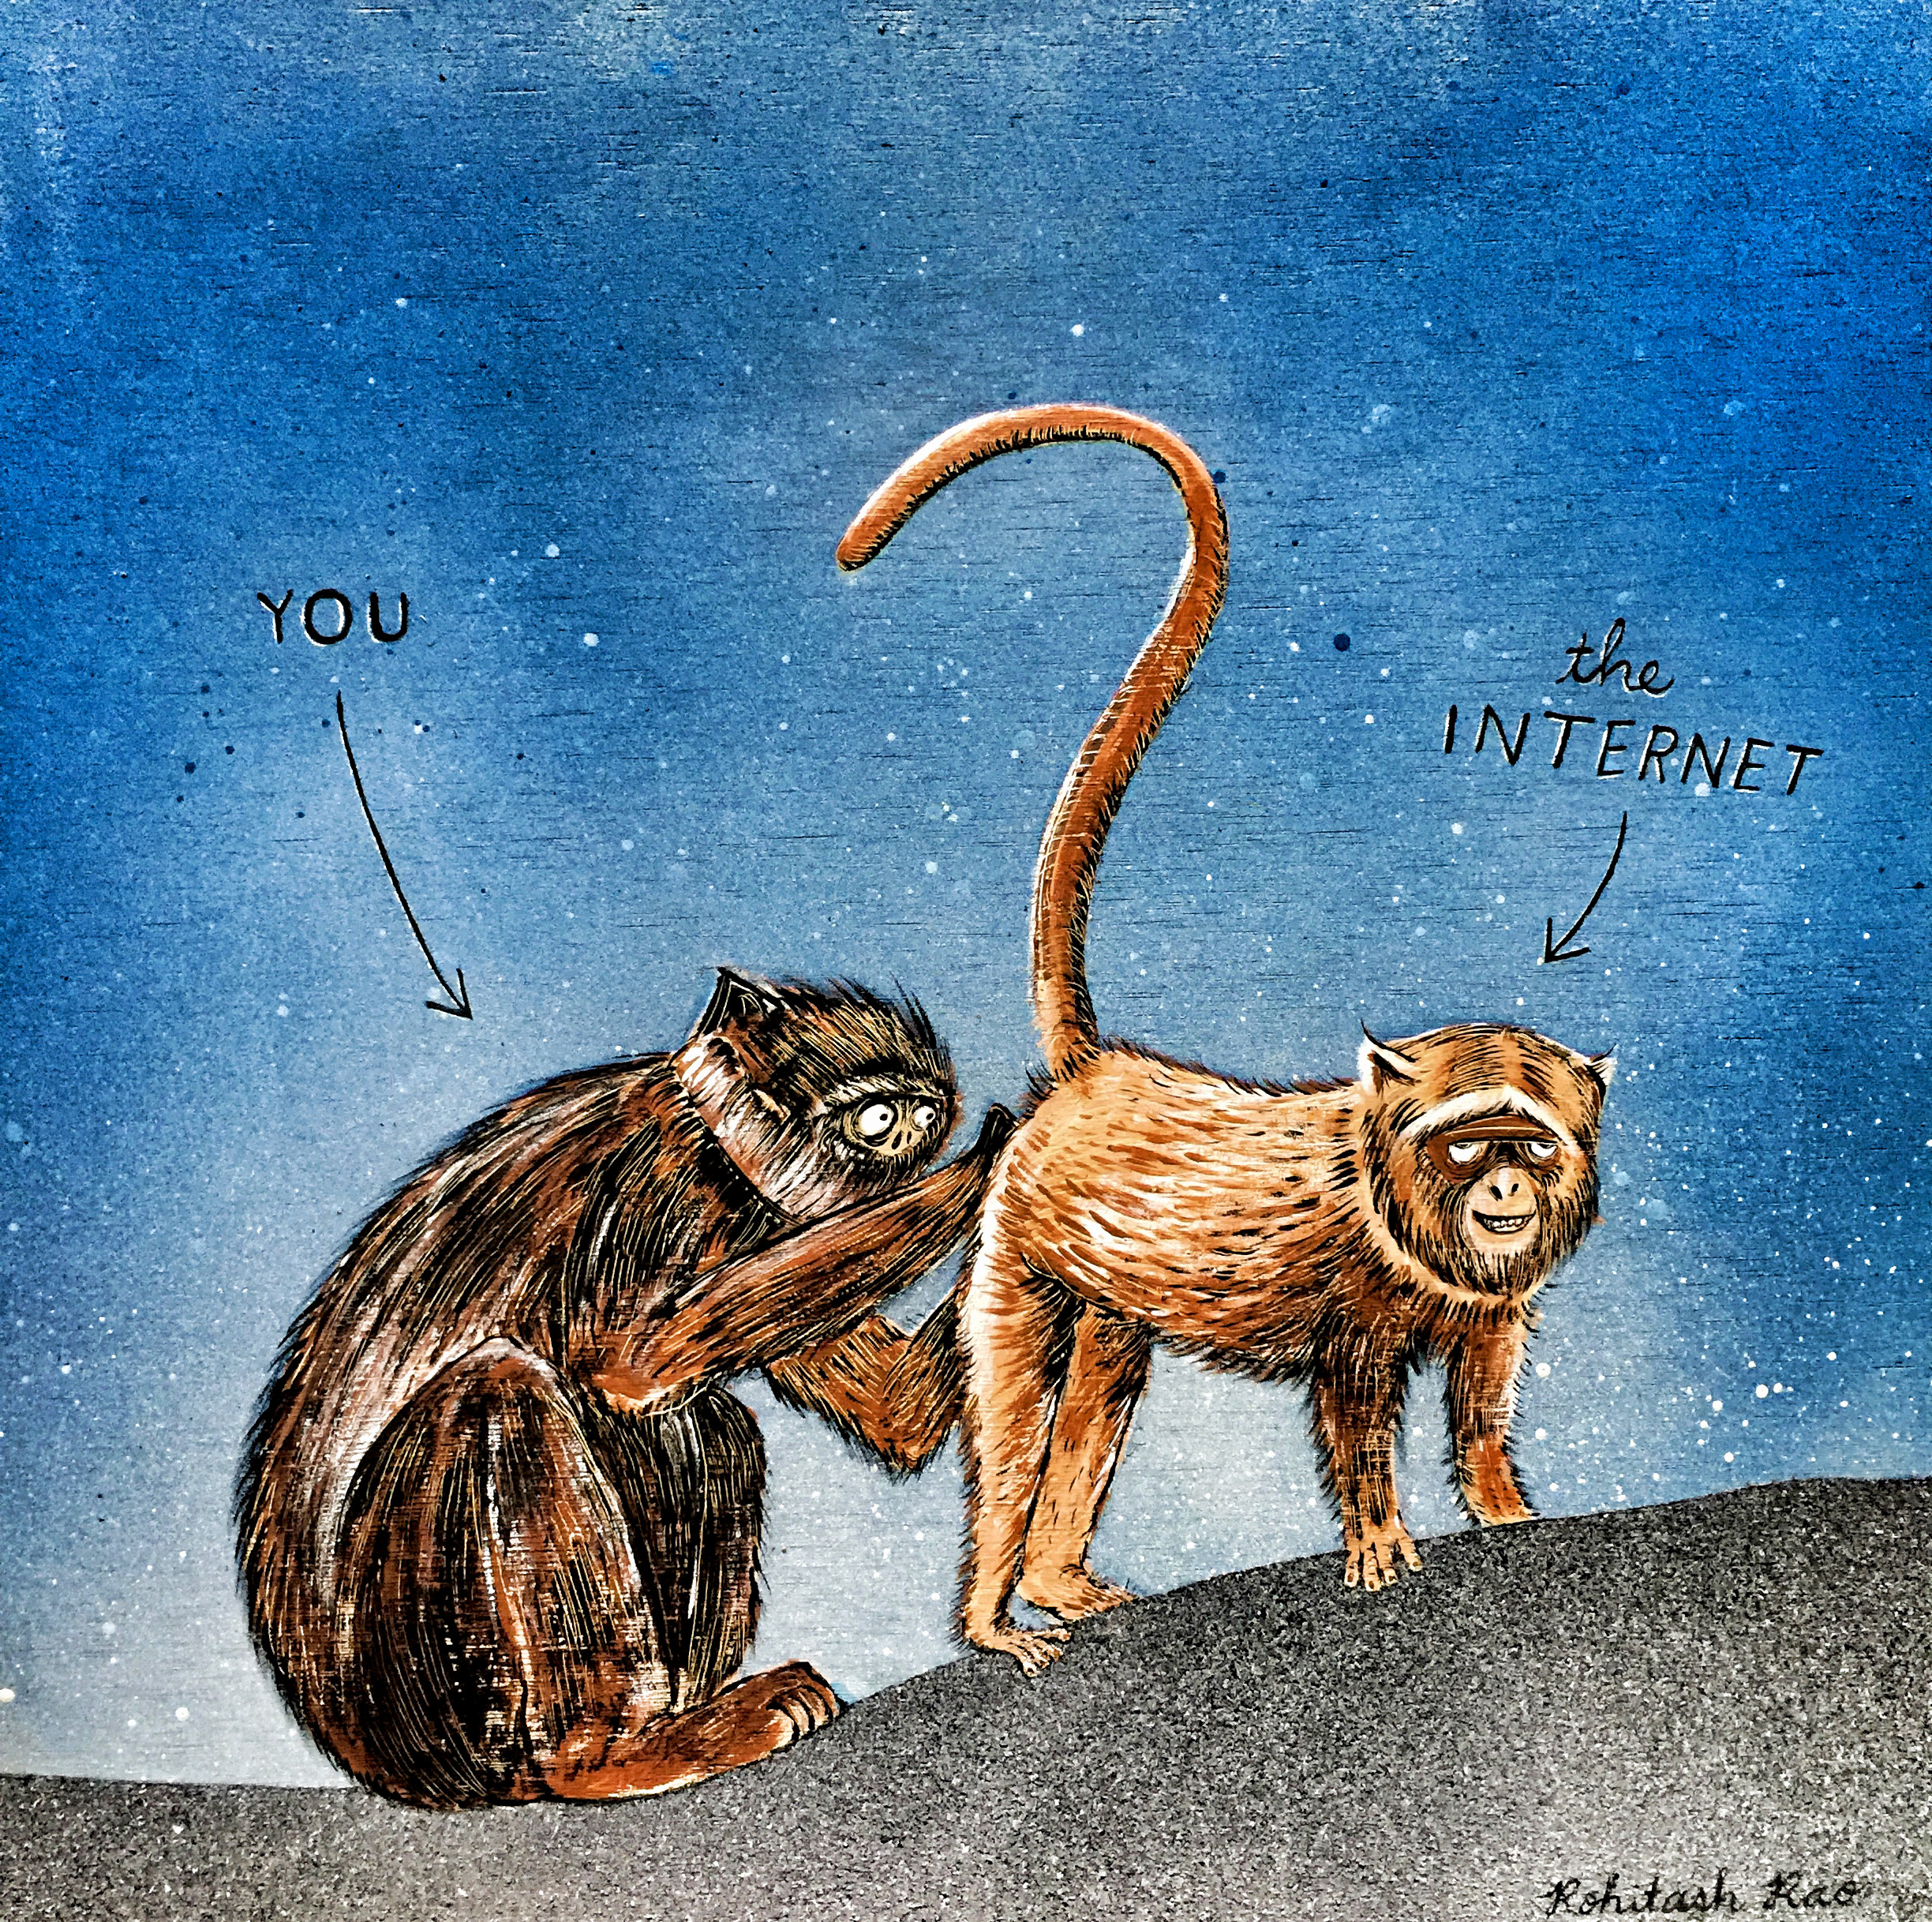 YOU AND THE INTERNET